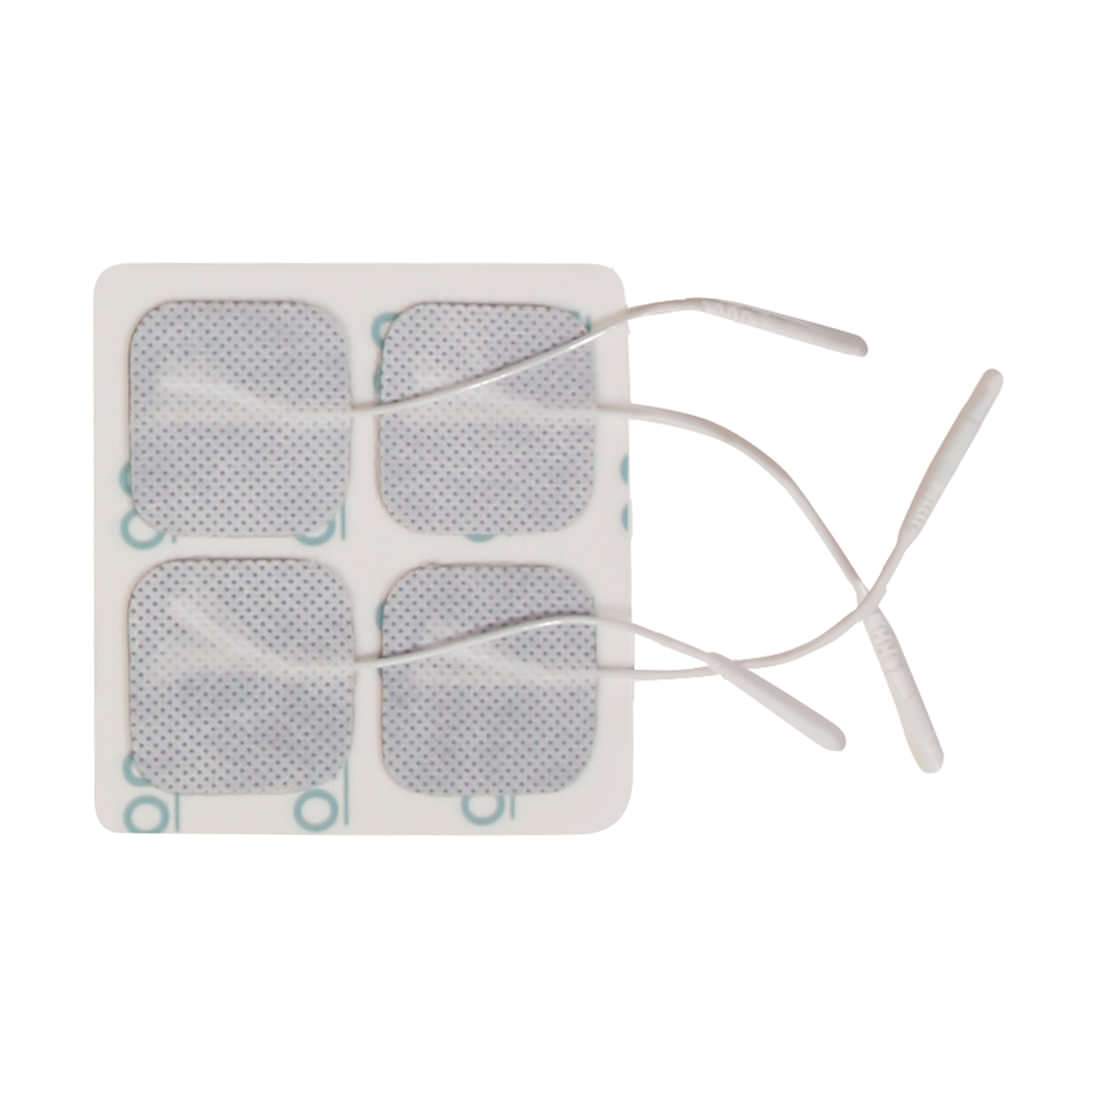 Adhesive Pre-Gelled Electrode Square, 1.57" x 1.57" (Package of 4)